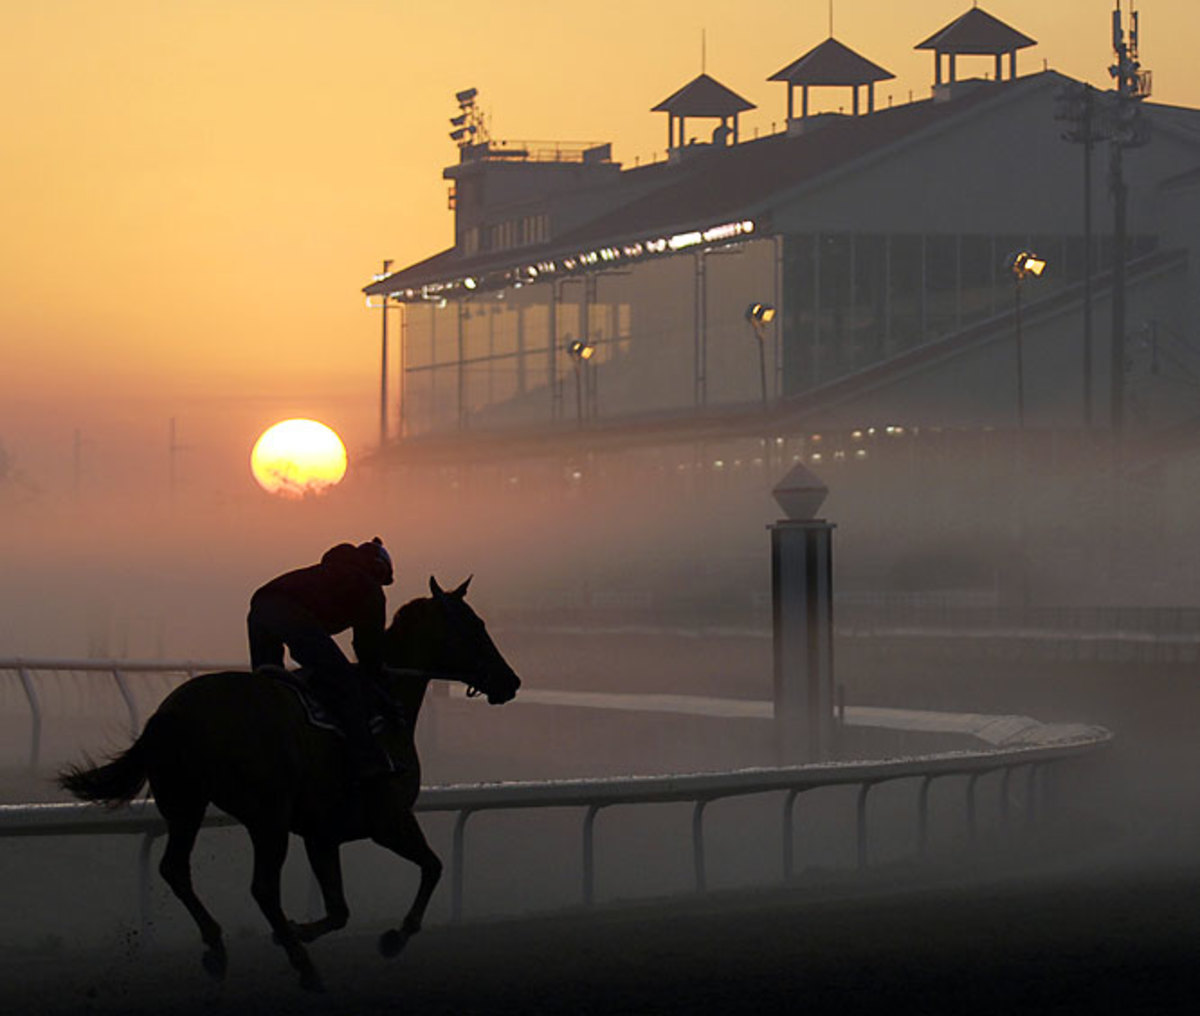 Sunrise at the Fair Grounds in New Orleans